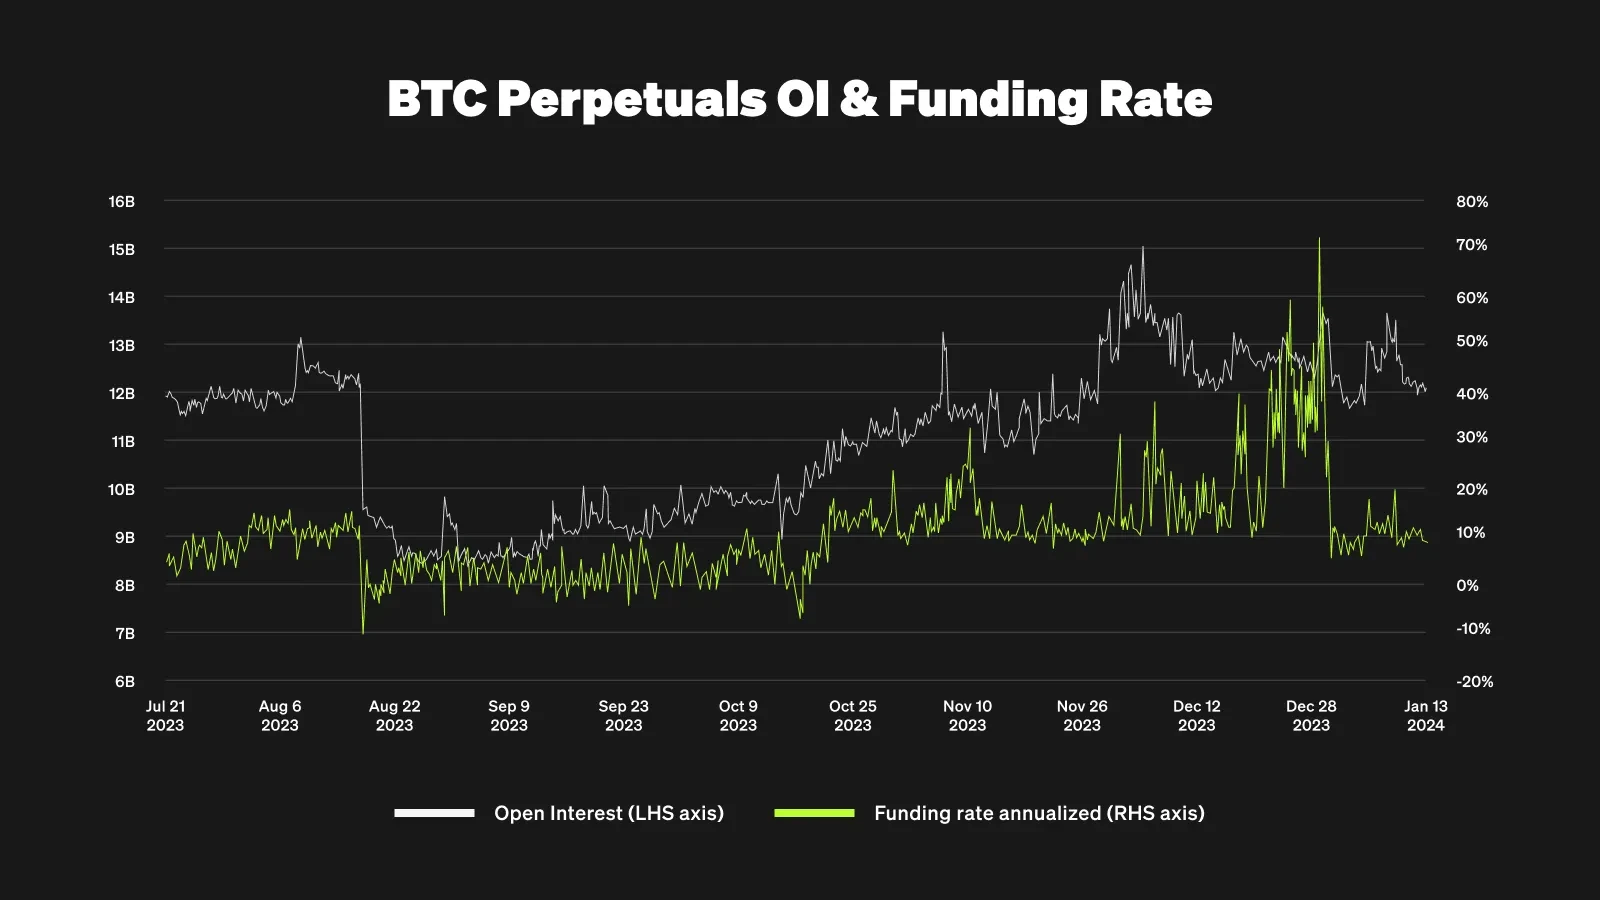 BTC Perps OI & Funding Rate